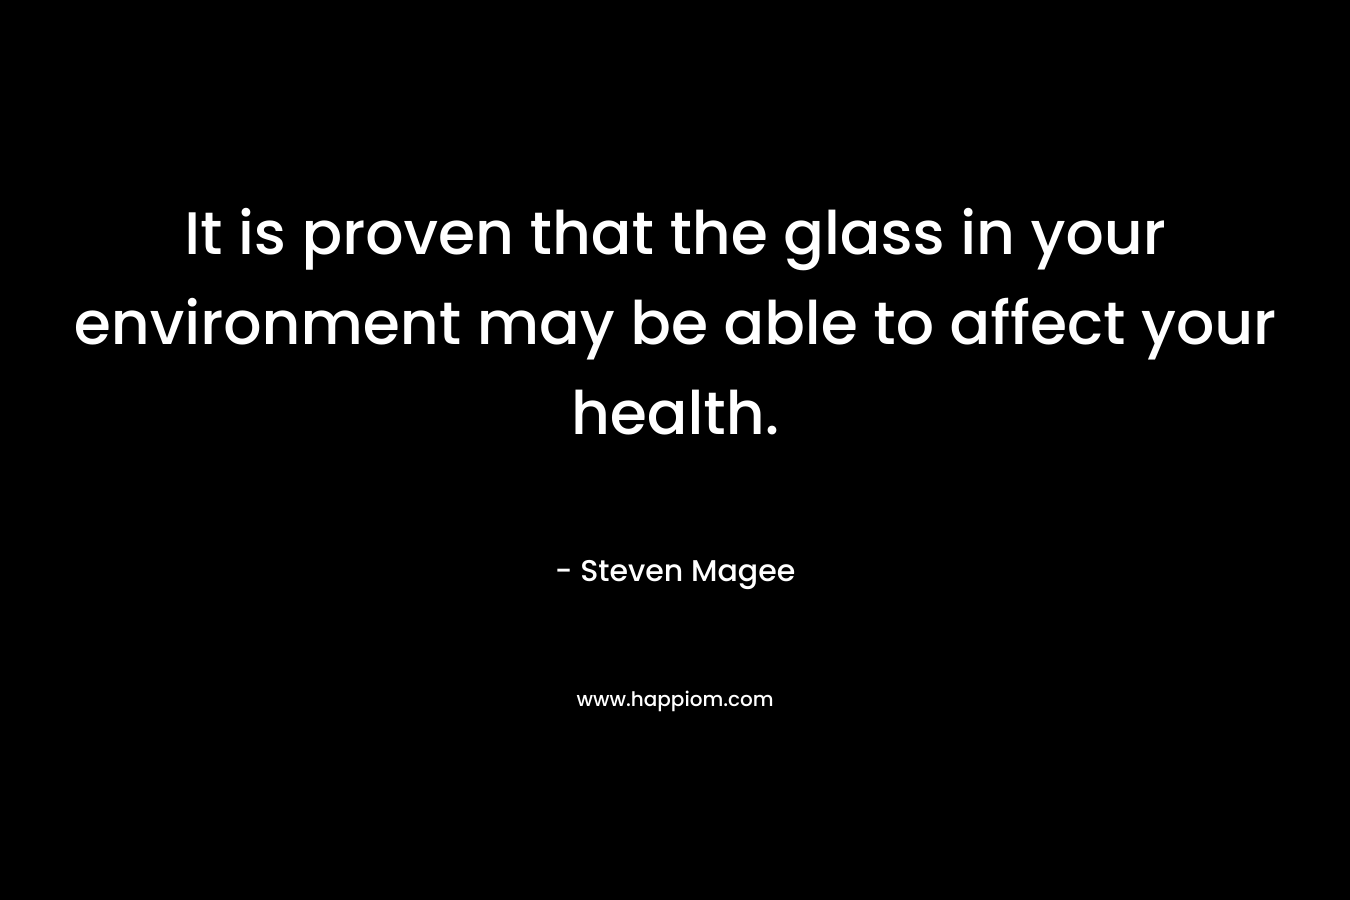 It is proven that the glass in your environment may be able to affect your health.